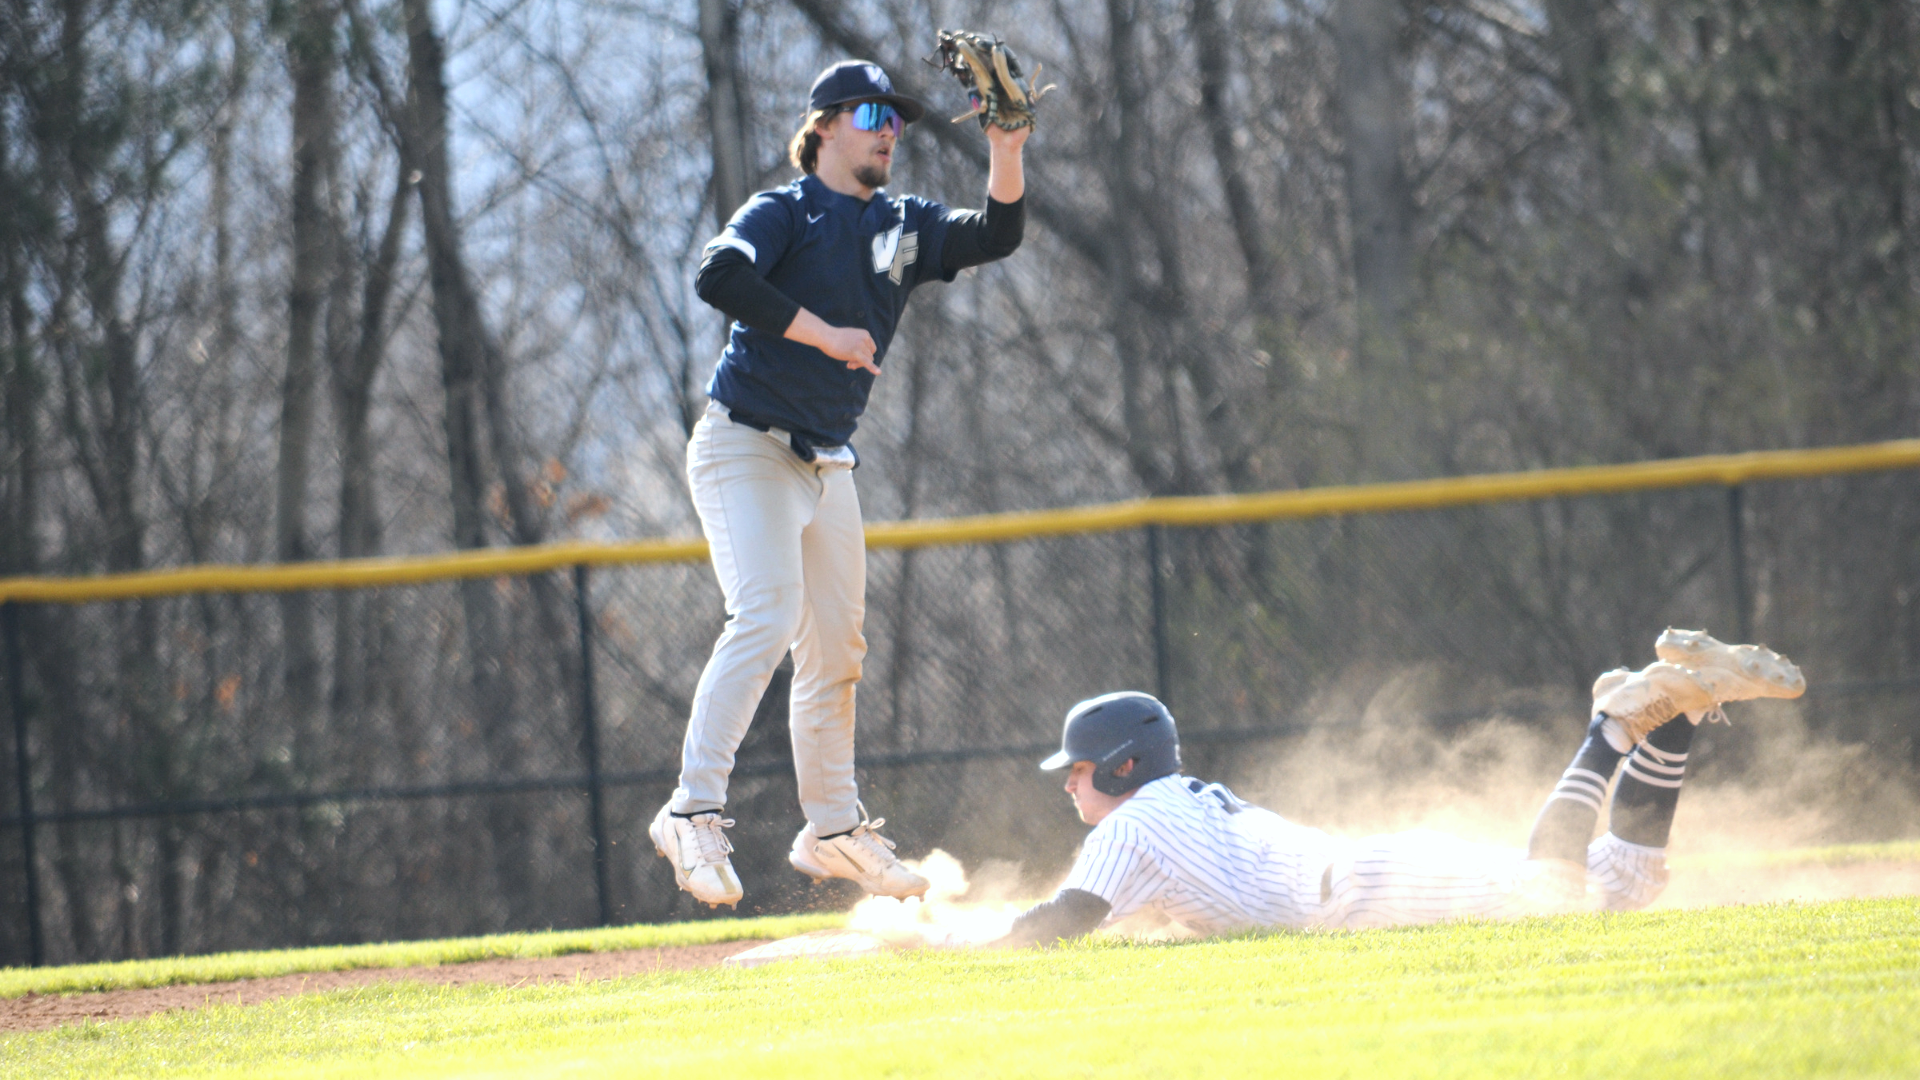 Mike DeWolfe slides headfirst into 2nd for the steal in Scranton's win over Valley Forge Wednesday afternoon.